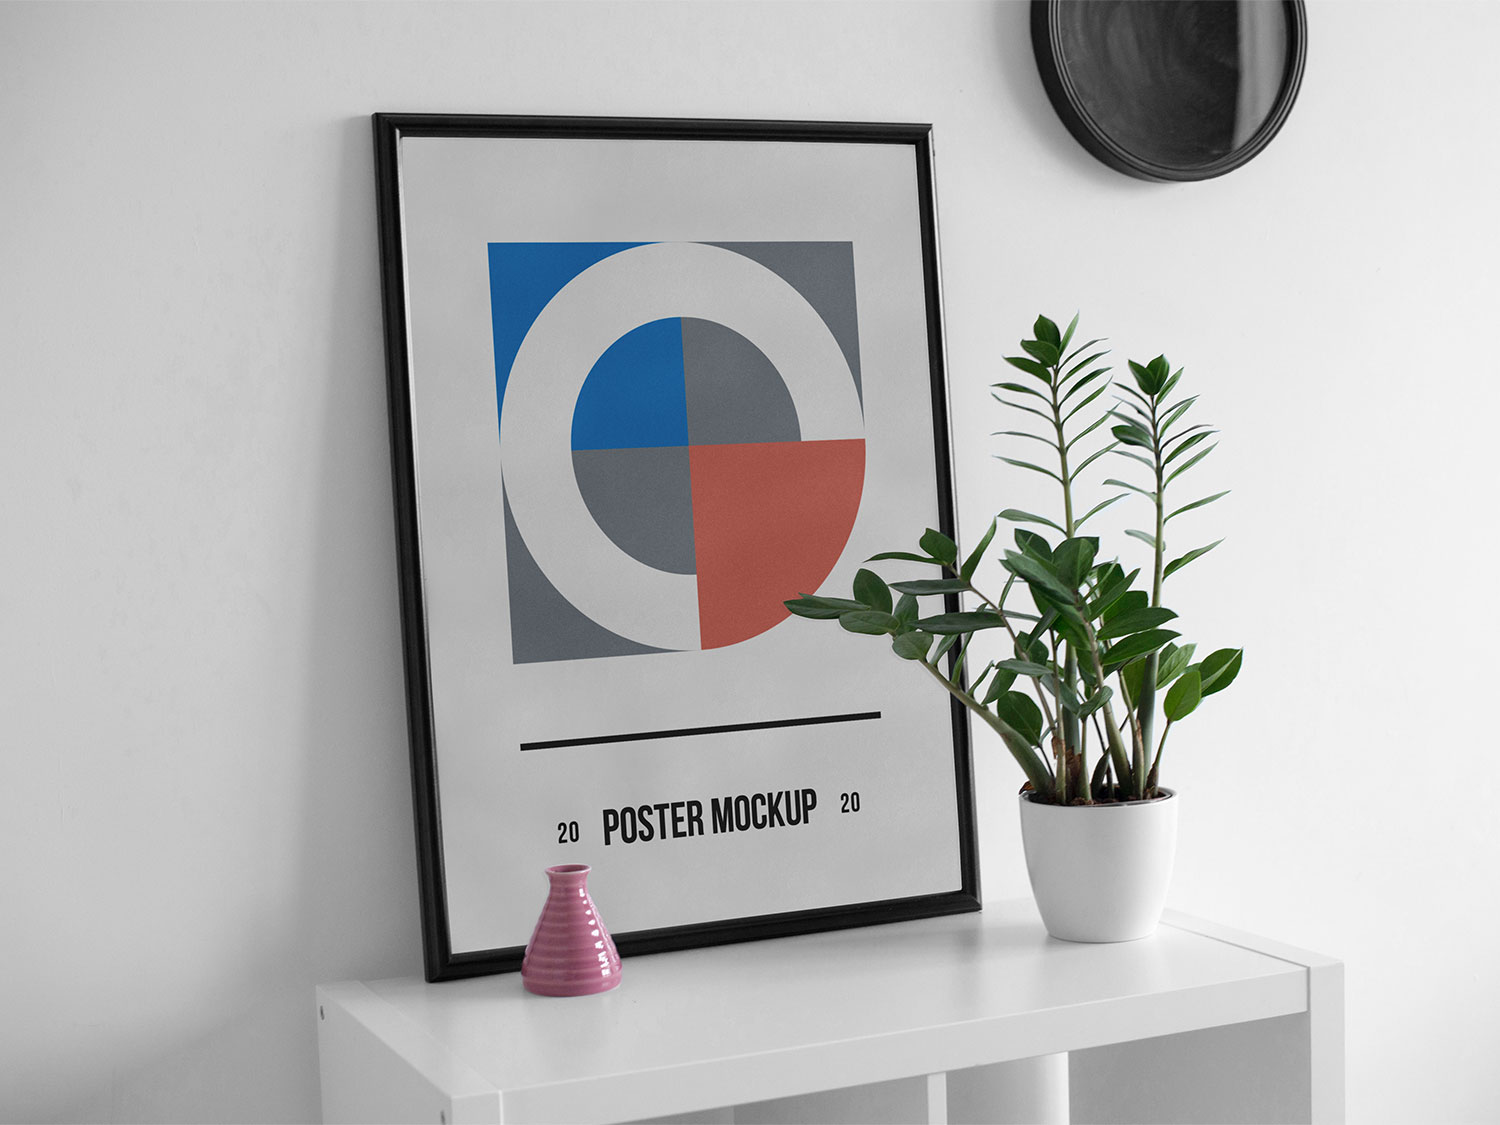 Poster Mockup on Table in Minimalist Interior (PSD)